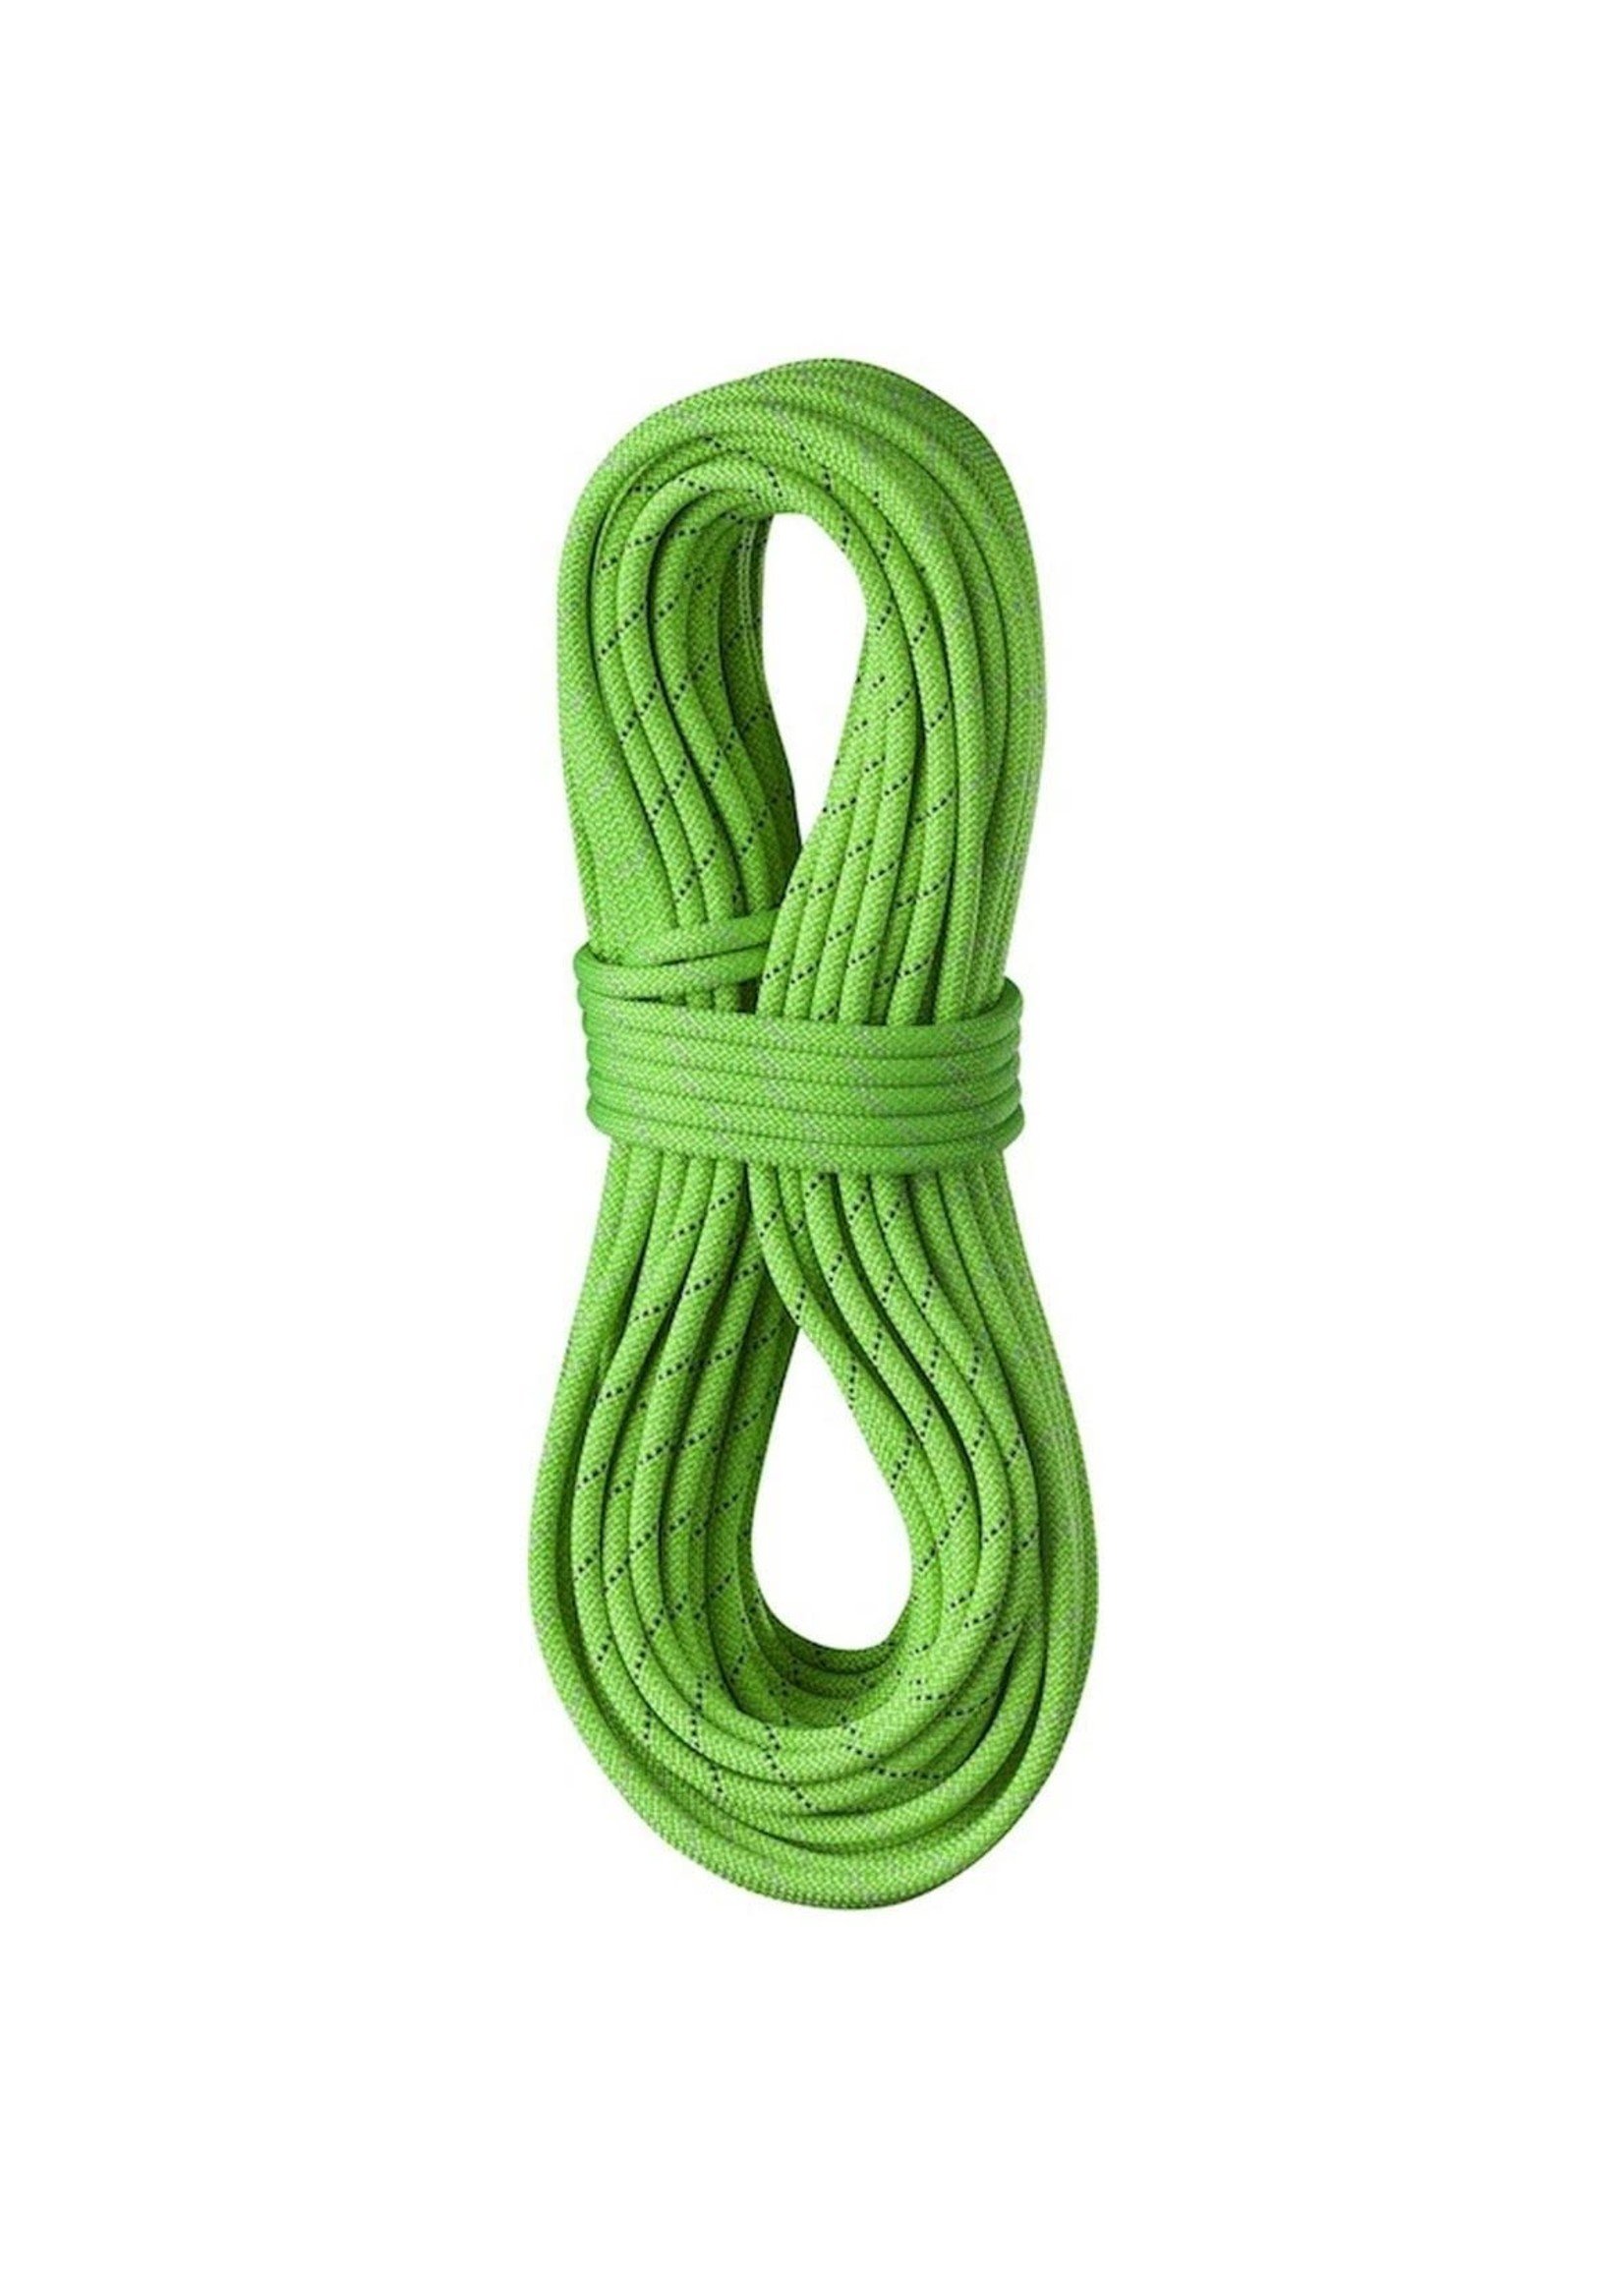 Edelrid Edelrid Tommy Caldwell Pro Dry DT Rope - 9.6 mm